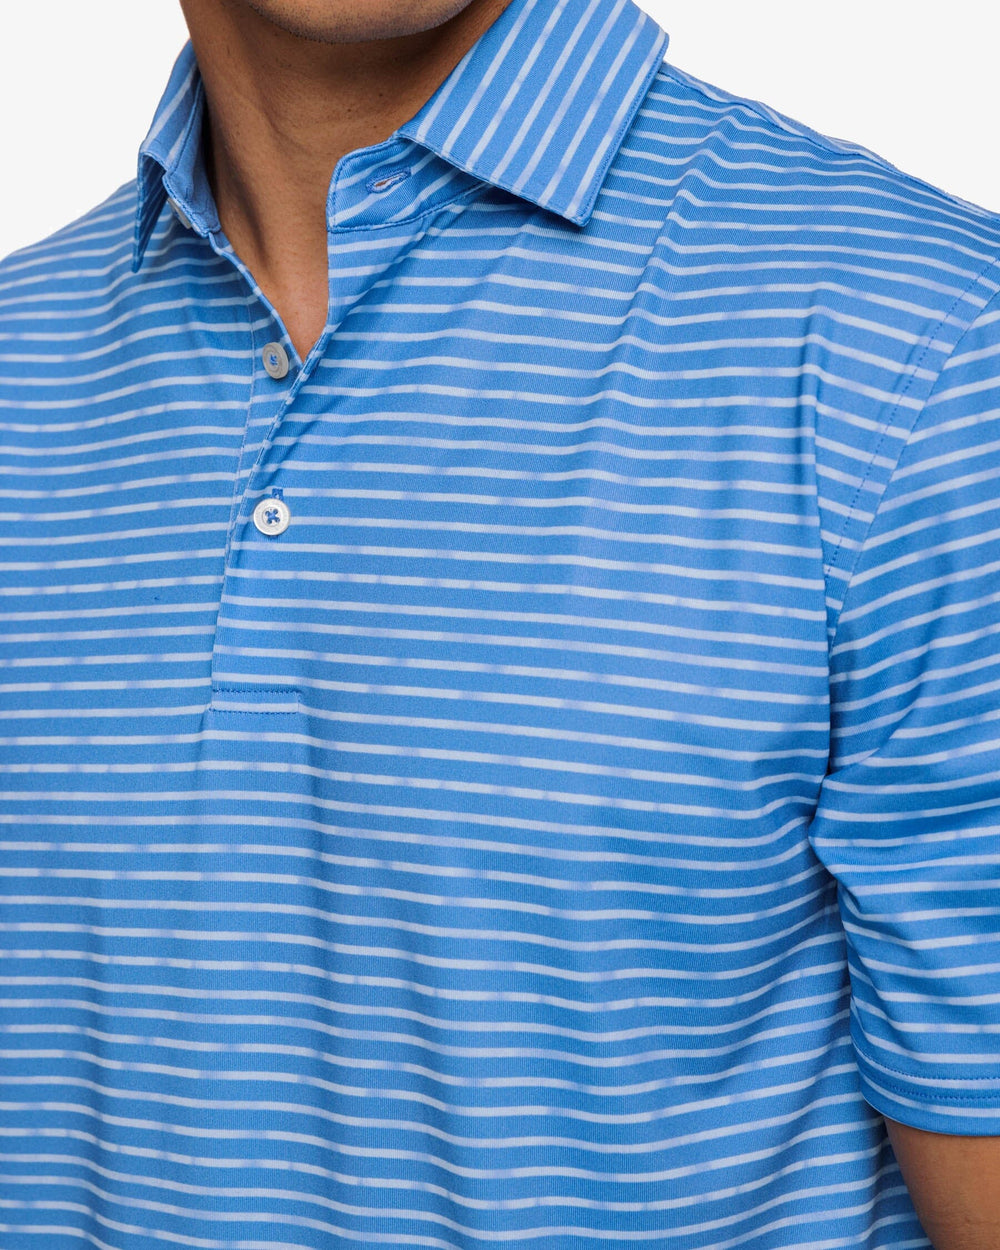 The detail view of the Southern Tide Driver Wymberly Stripe Performance Polo Shirt by Southern Tide - Atlantic Blue